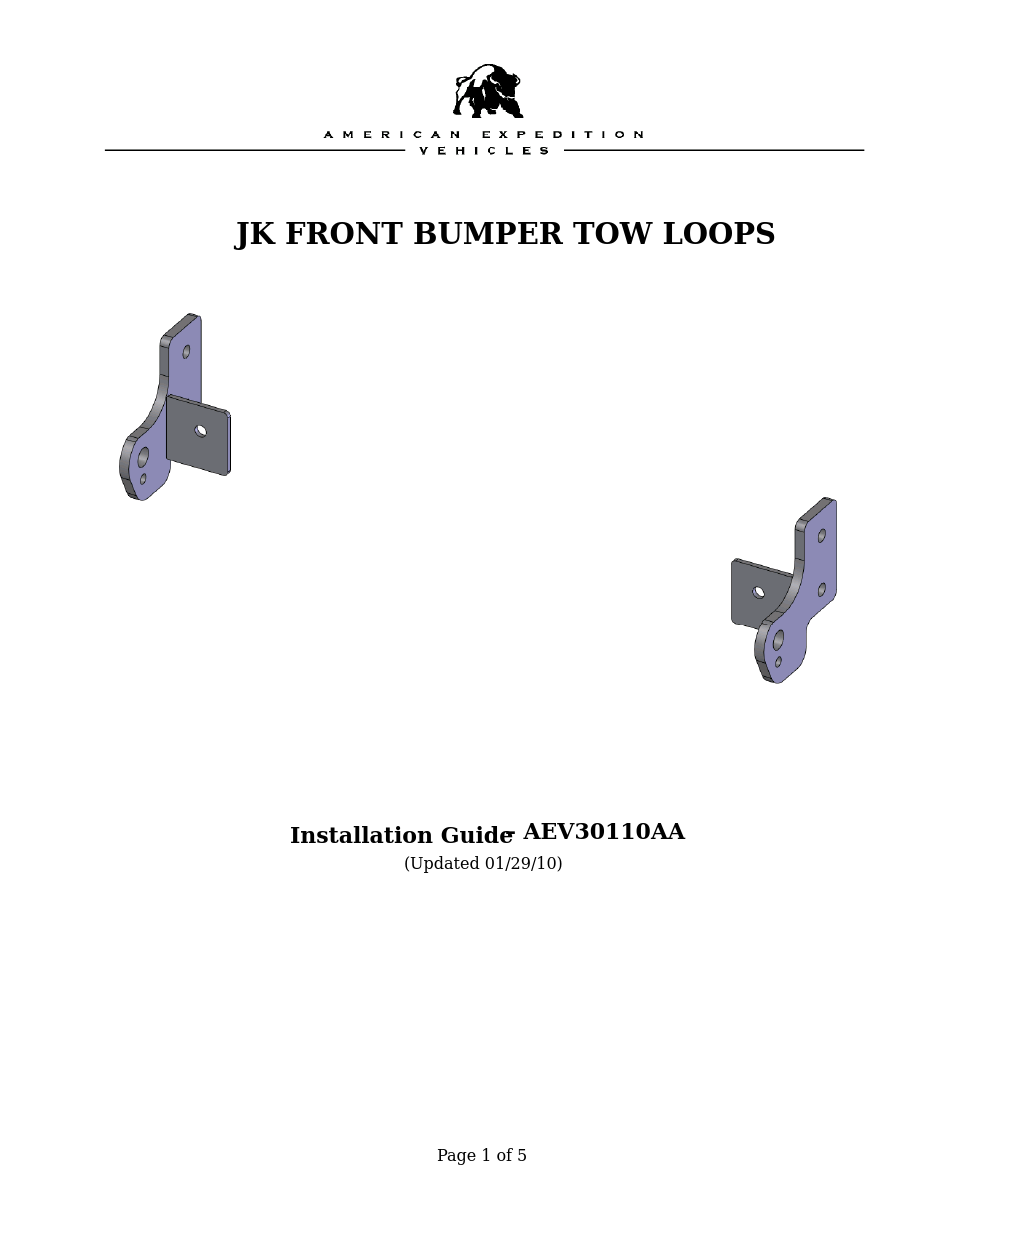 JK Replacement Tow Loops